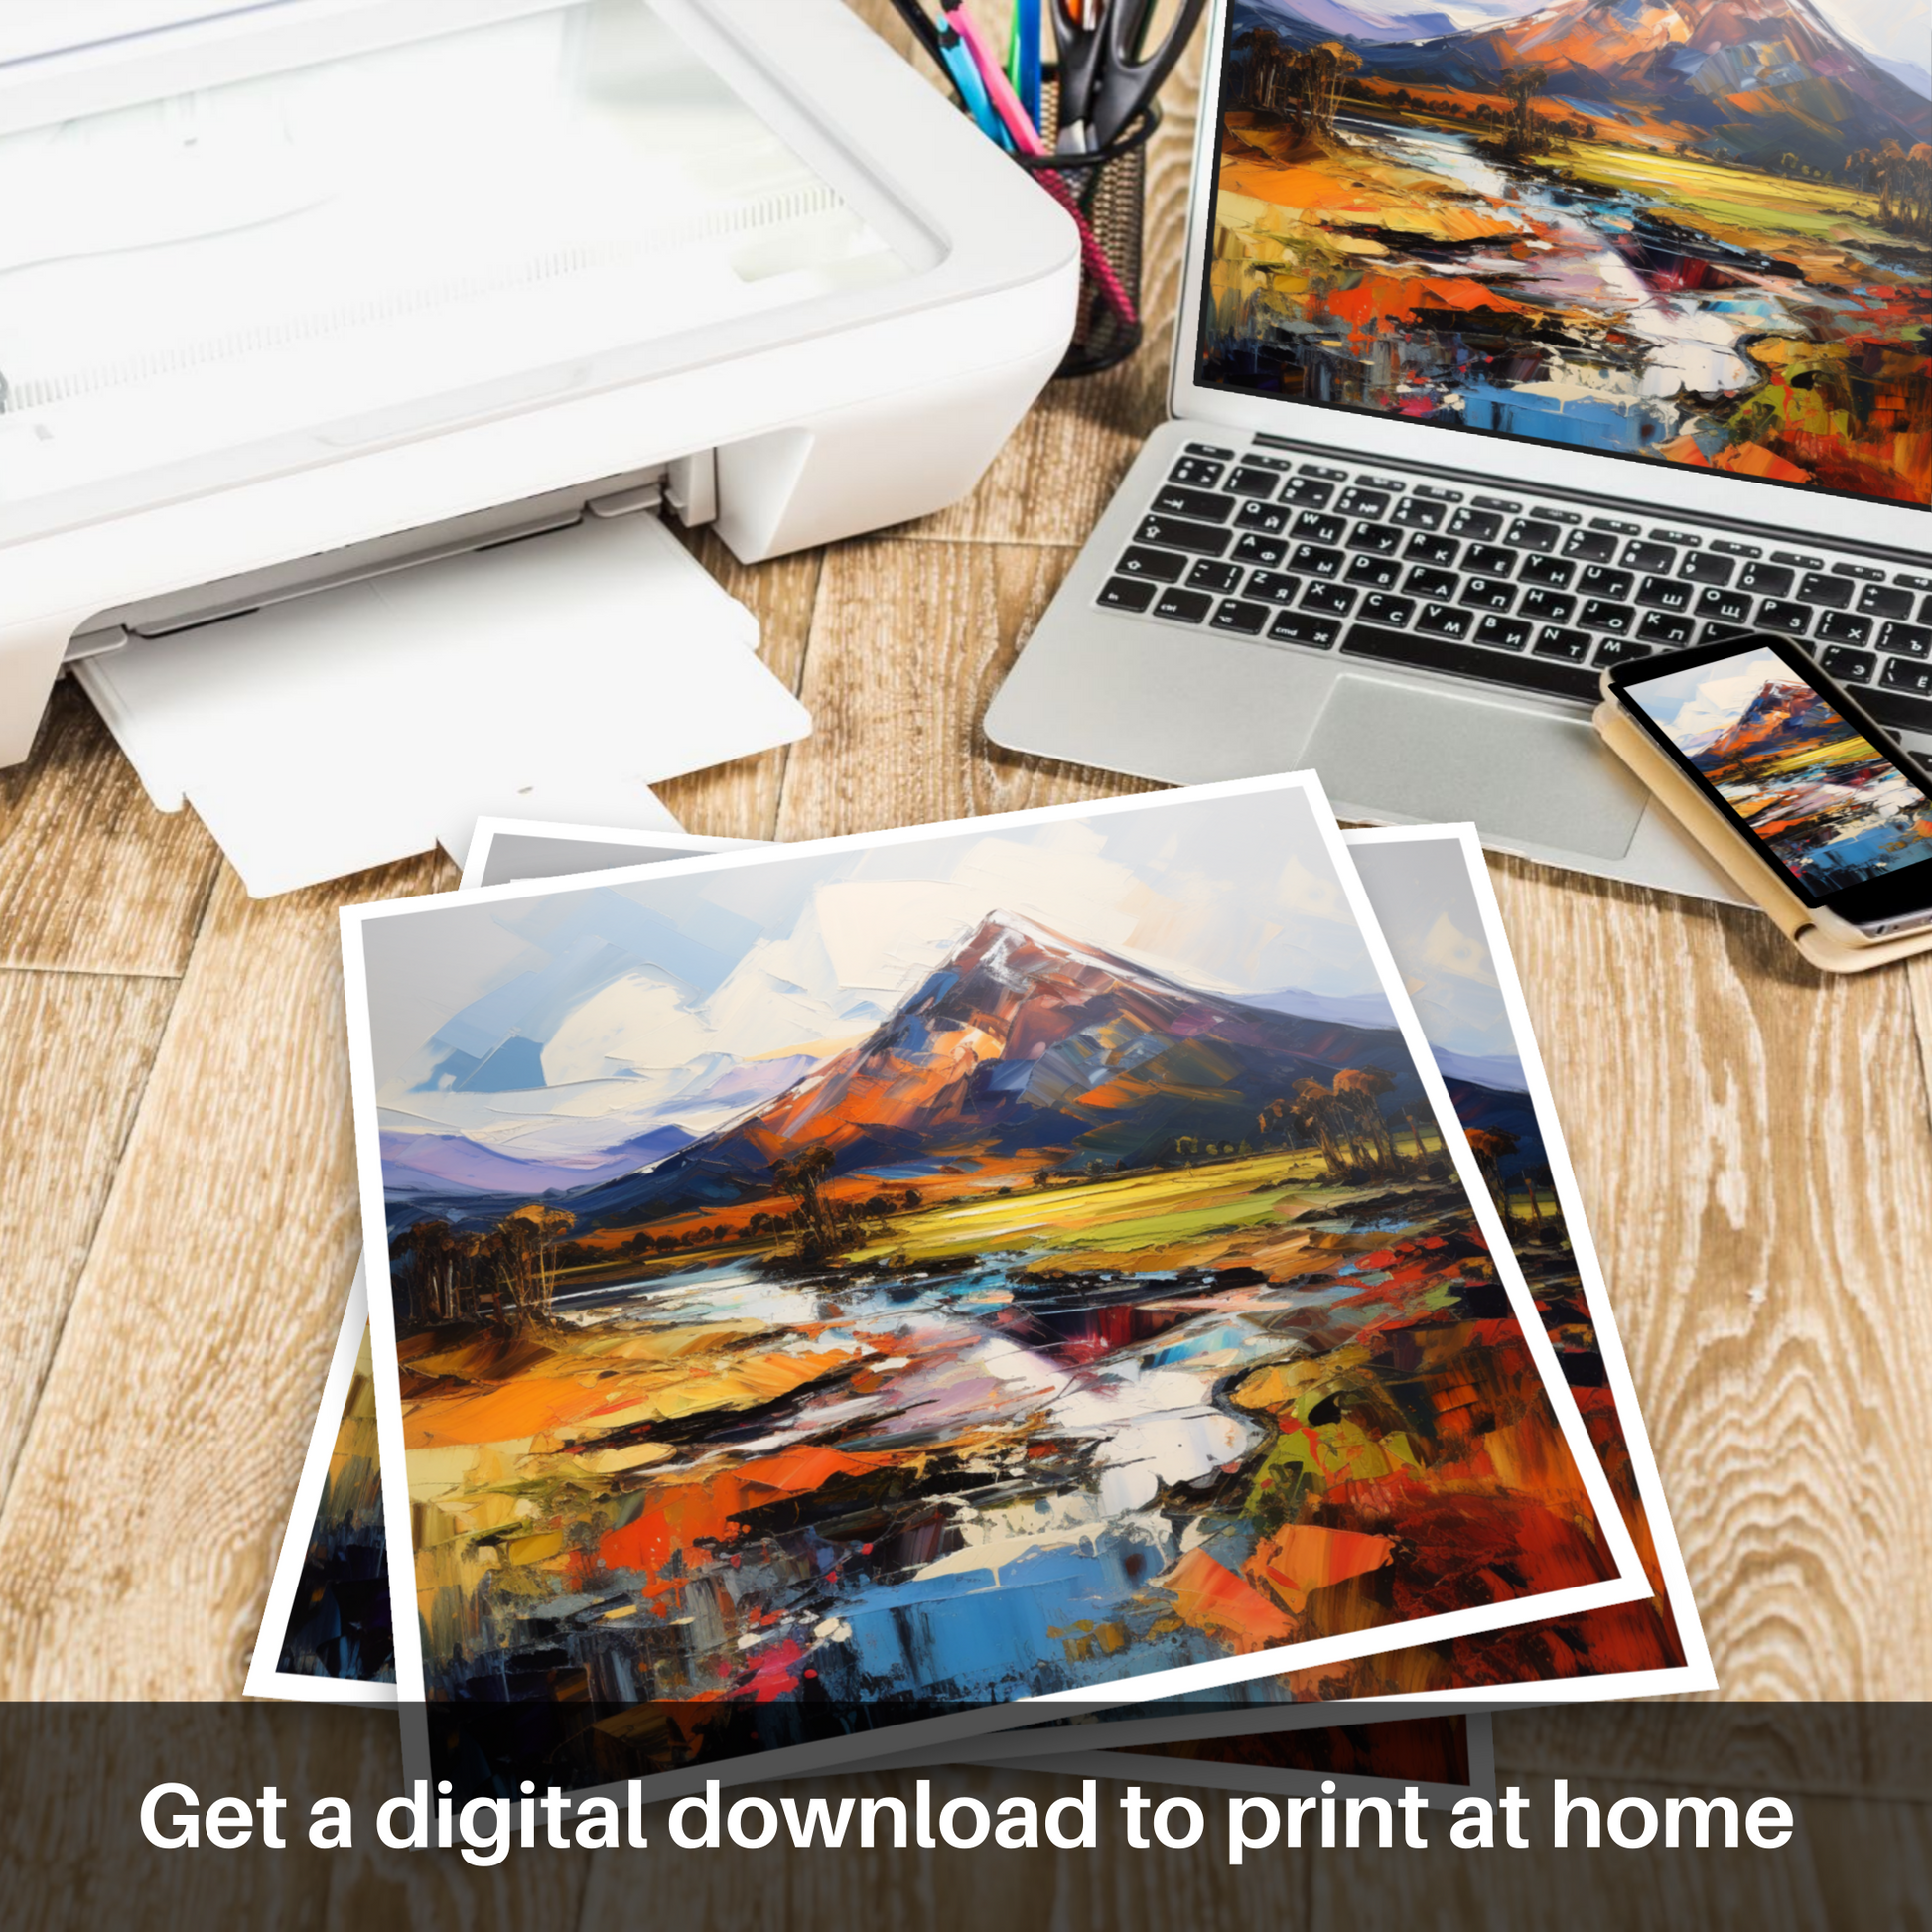 Downloadable and printable picture of Schiehallion, Perth and Kinross